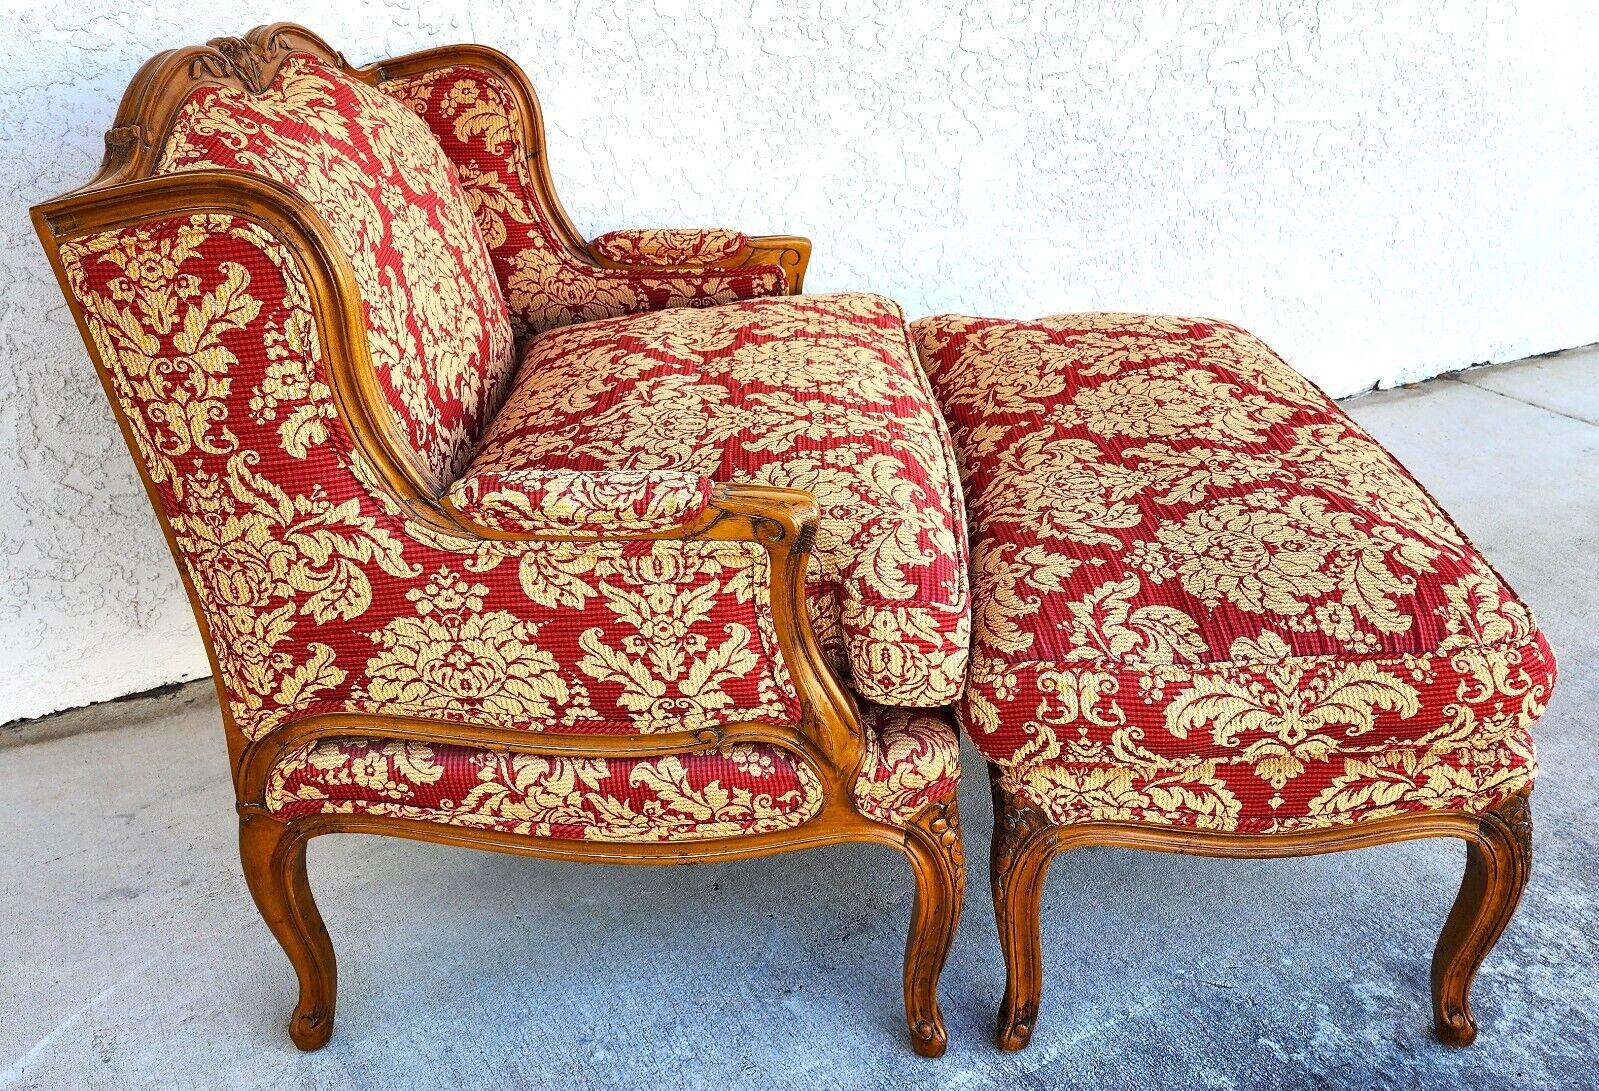 French Provincial French Bergere Chair & Ottoman Oversized